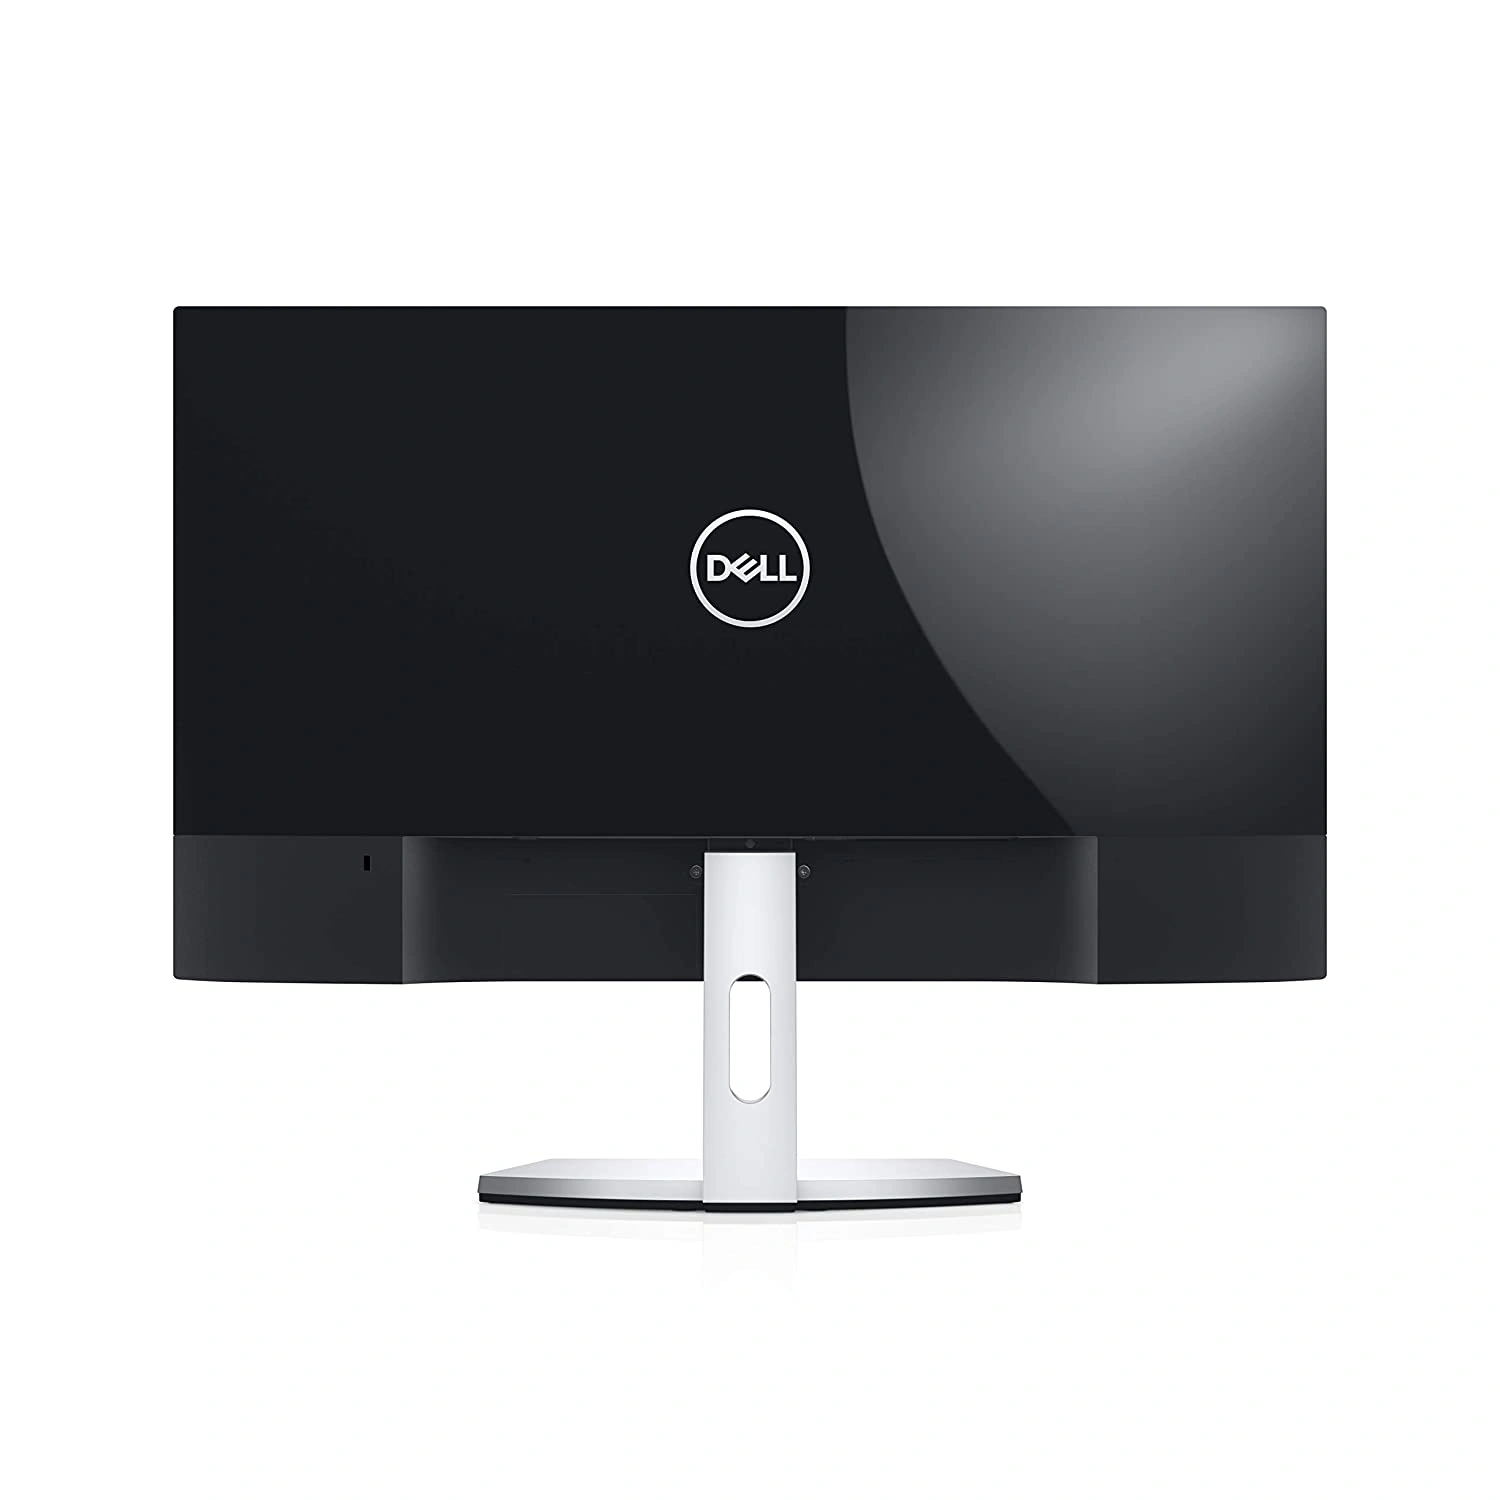 Dell SE2417HGX 23.6 inch (59.94cm) Full HD Gaming Monitor with